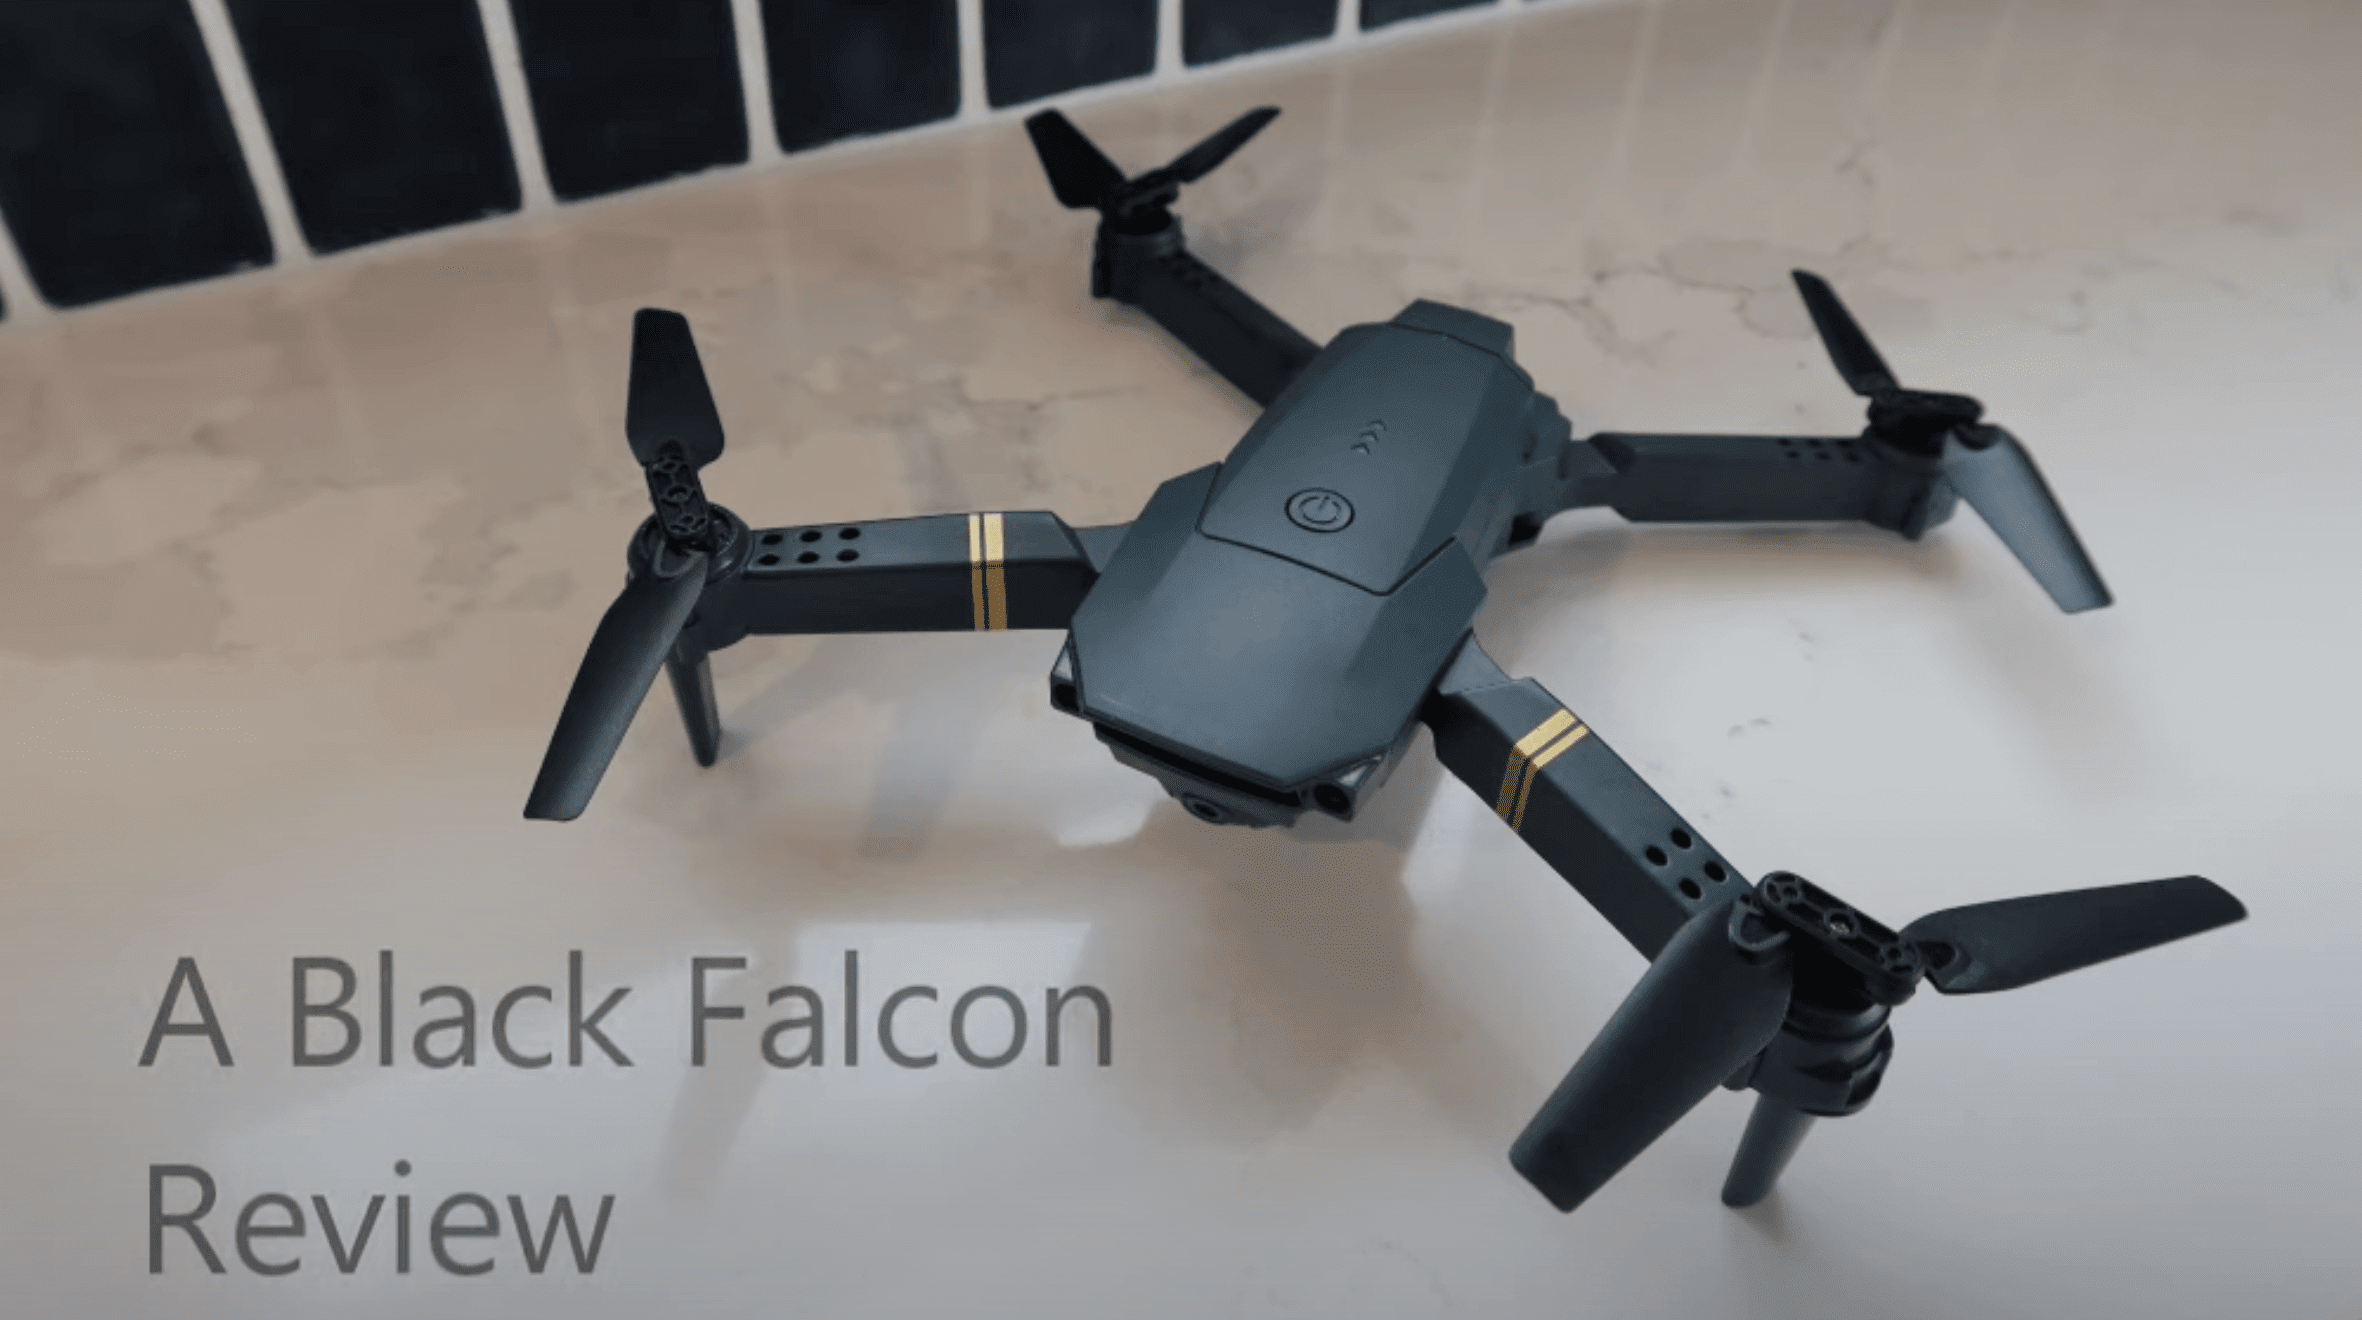 Black Falcon 4K Drone lying on the table